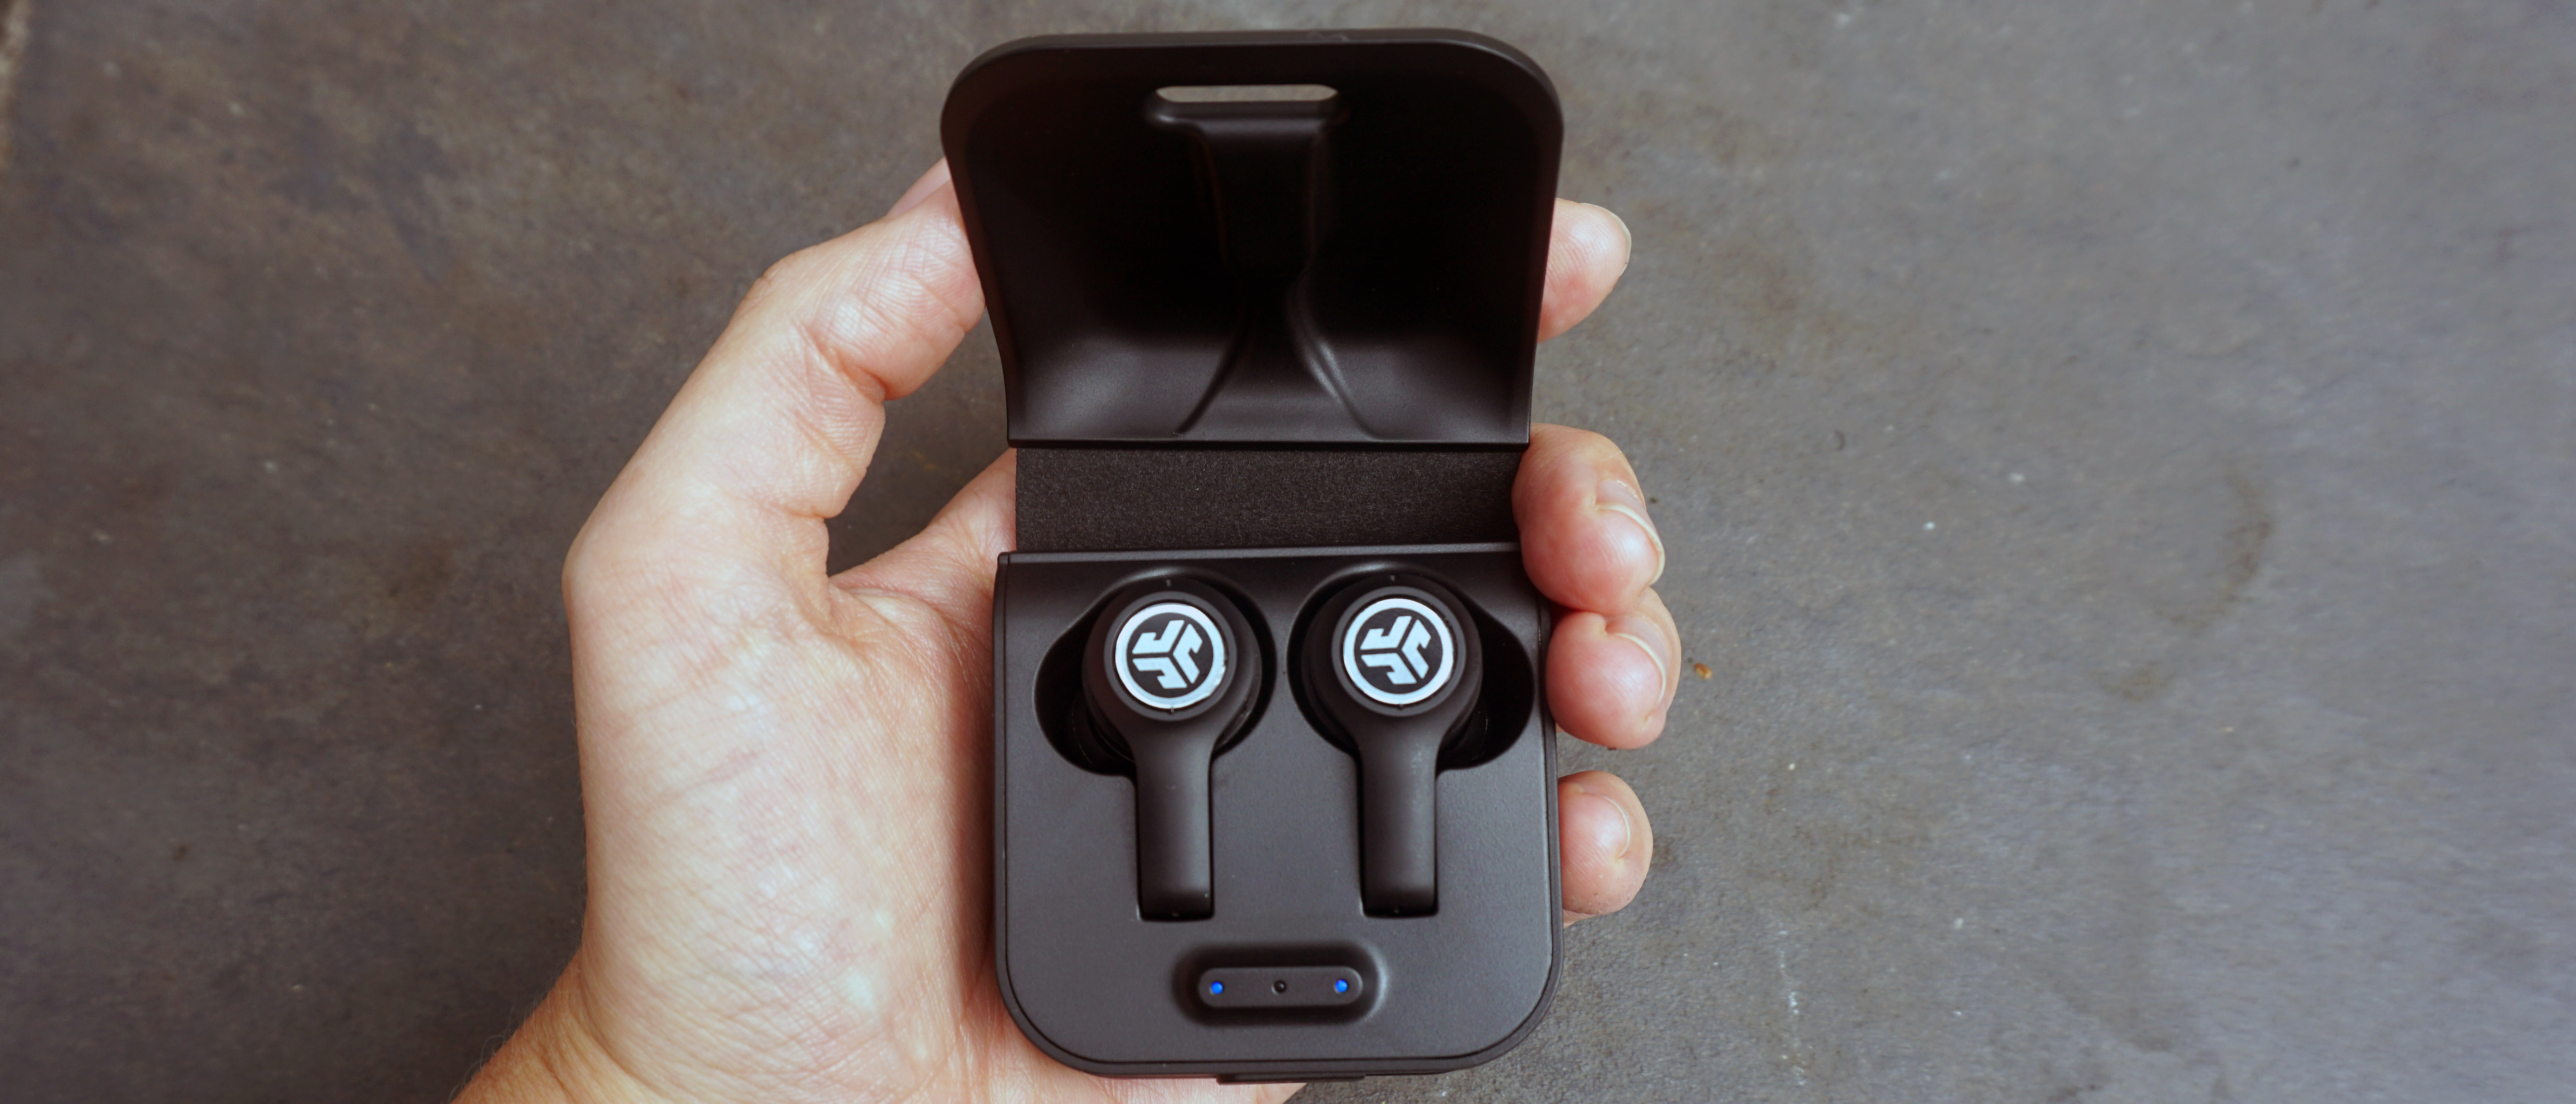 How To Pair Jlab Earbuds With Iphone